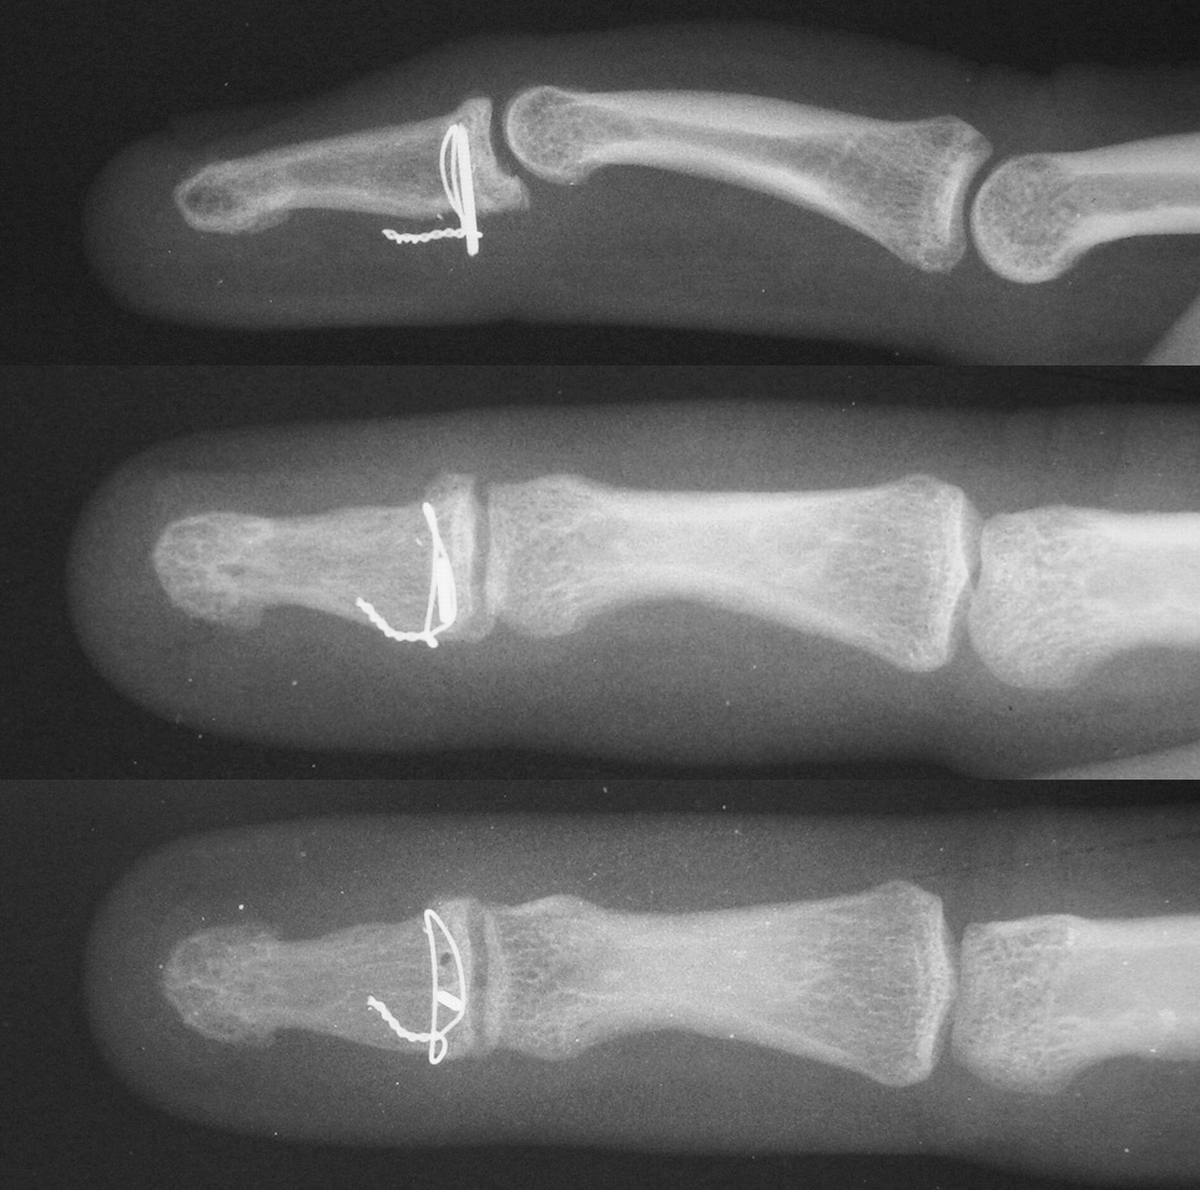 Trauma: Open Reduction Distal Phalanx Base Fractures with Wires and Pins